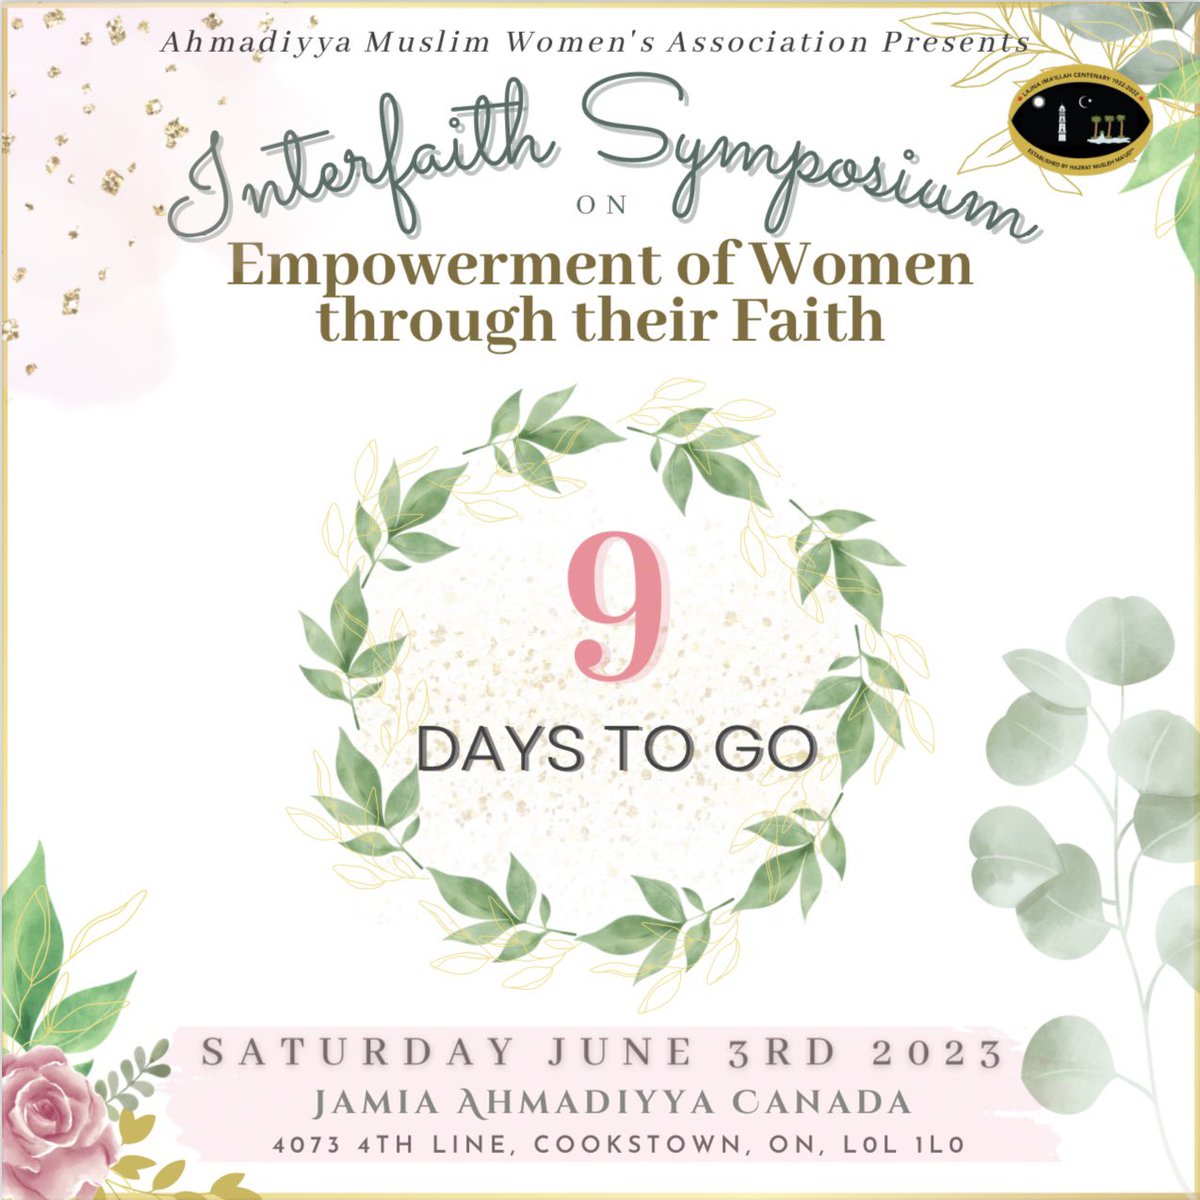 Join us to celebrate the 100 years of the Ahmadiyya Muslim Women’s Association on June 3rd, discussing the Empowerment of Woman through various Faiths, including Christianity, Islam, Indigenous, and Judaism! 
Make sure to register now bit.ly/3ANjQq7 
#InterfaithSymposium